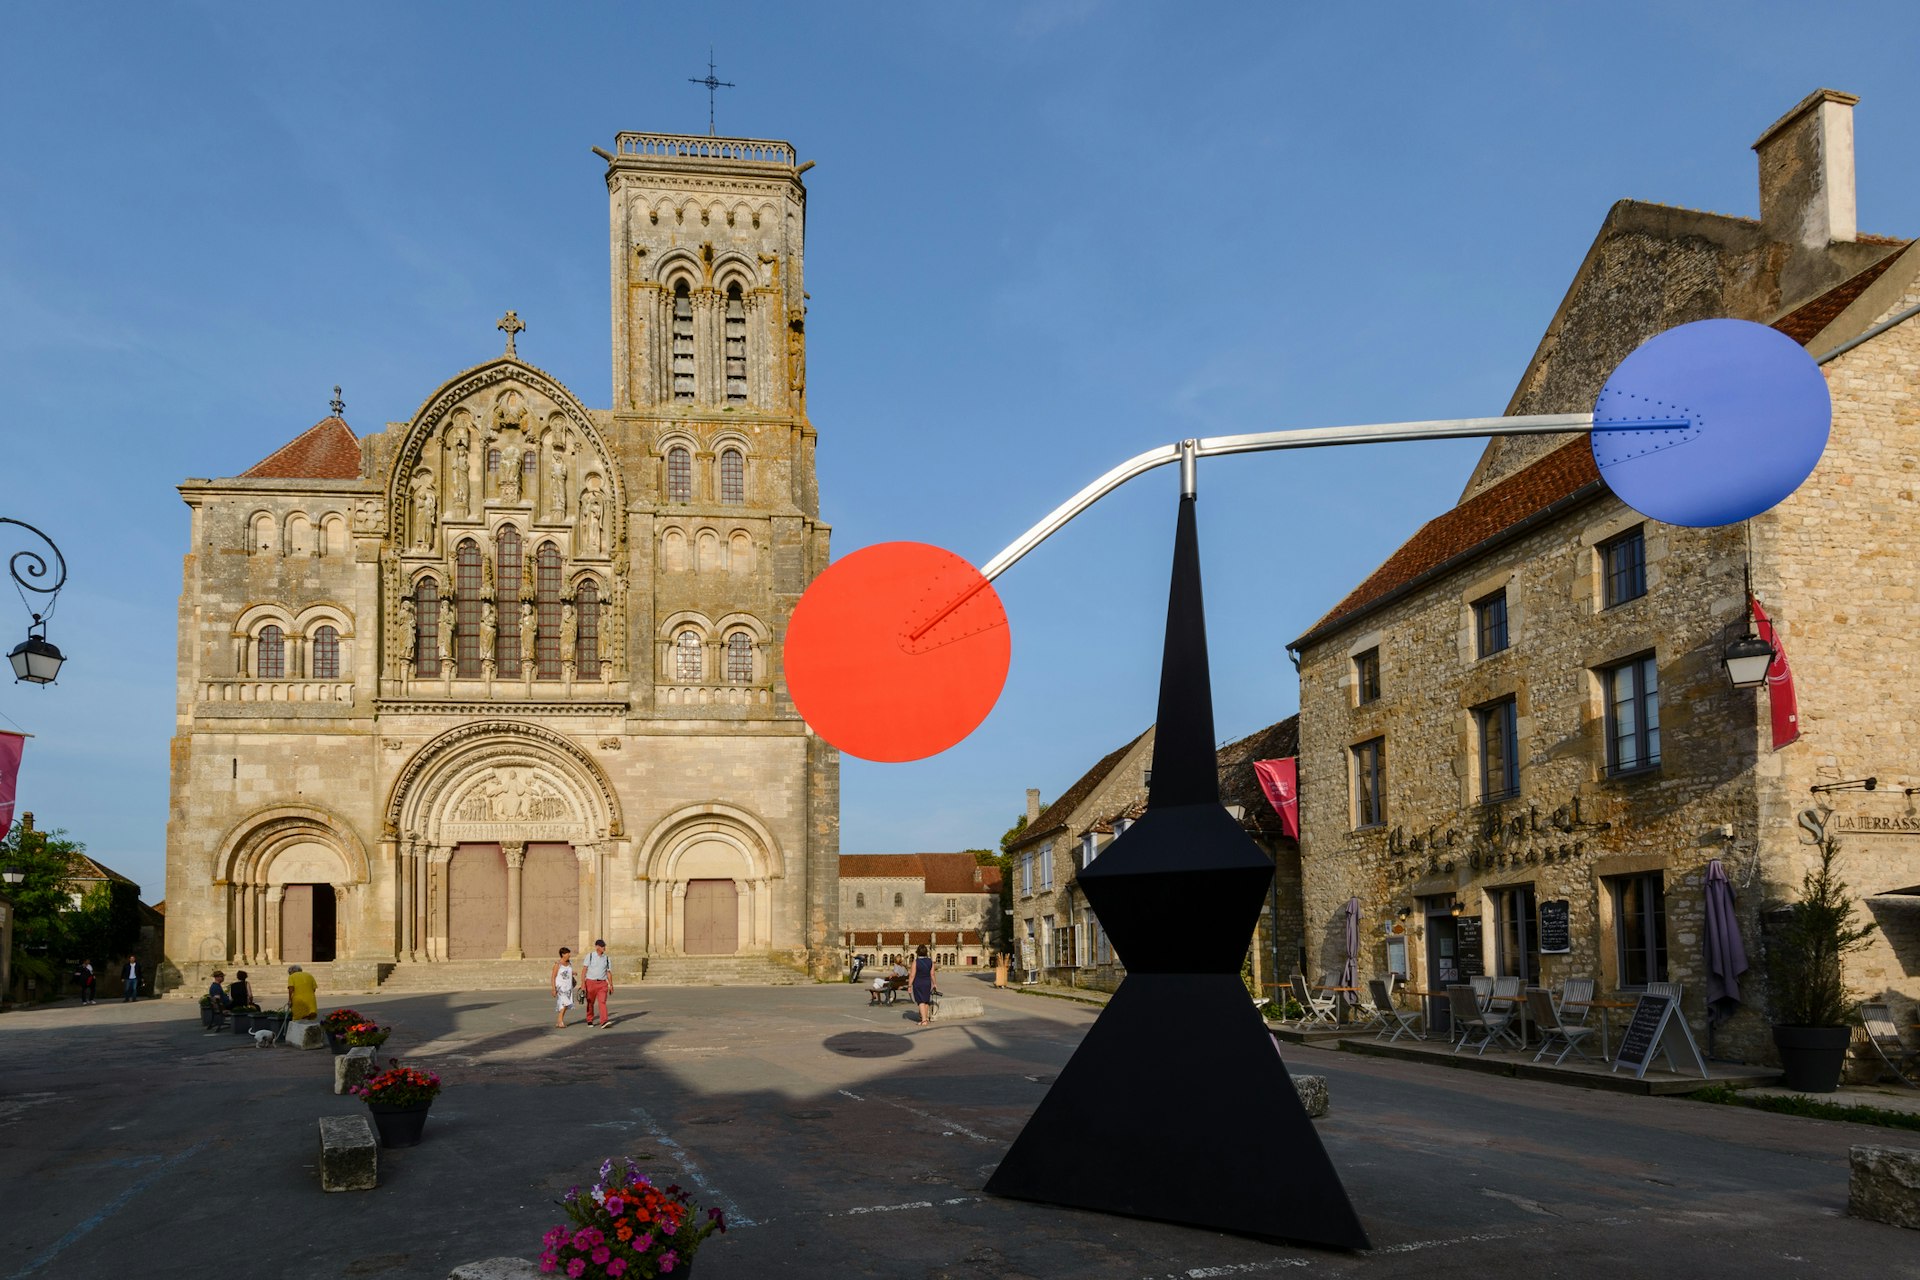 Moving sculpture by Calder on the Vezelay Abbey forecourt, Yonne, Burgundy France